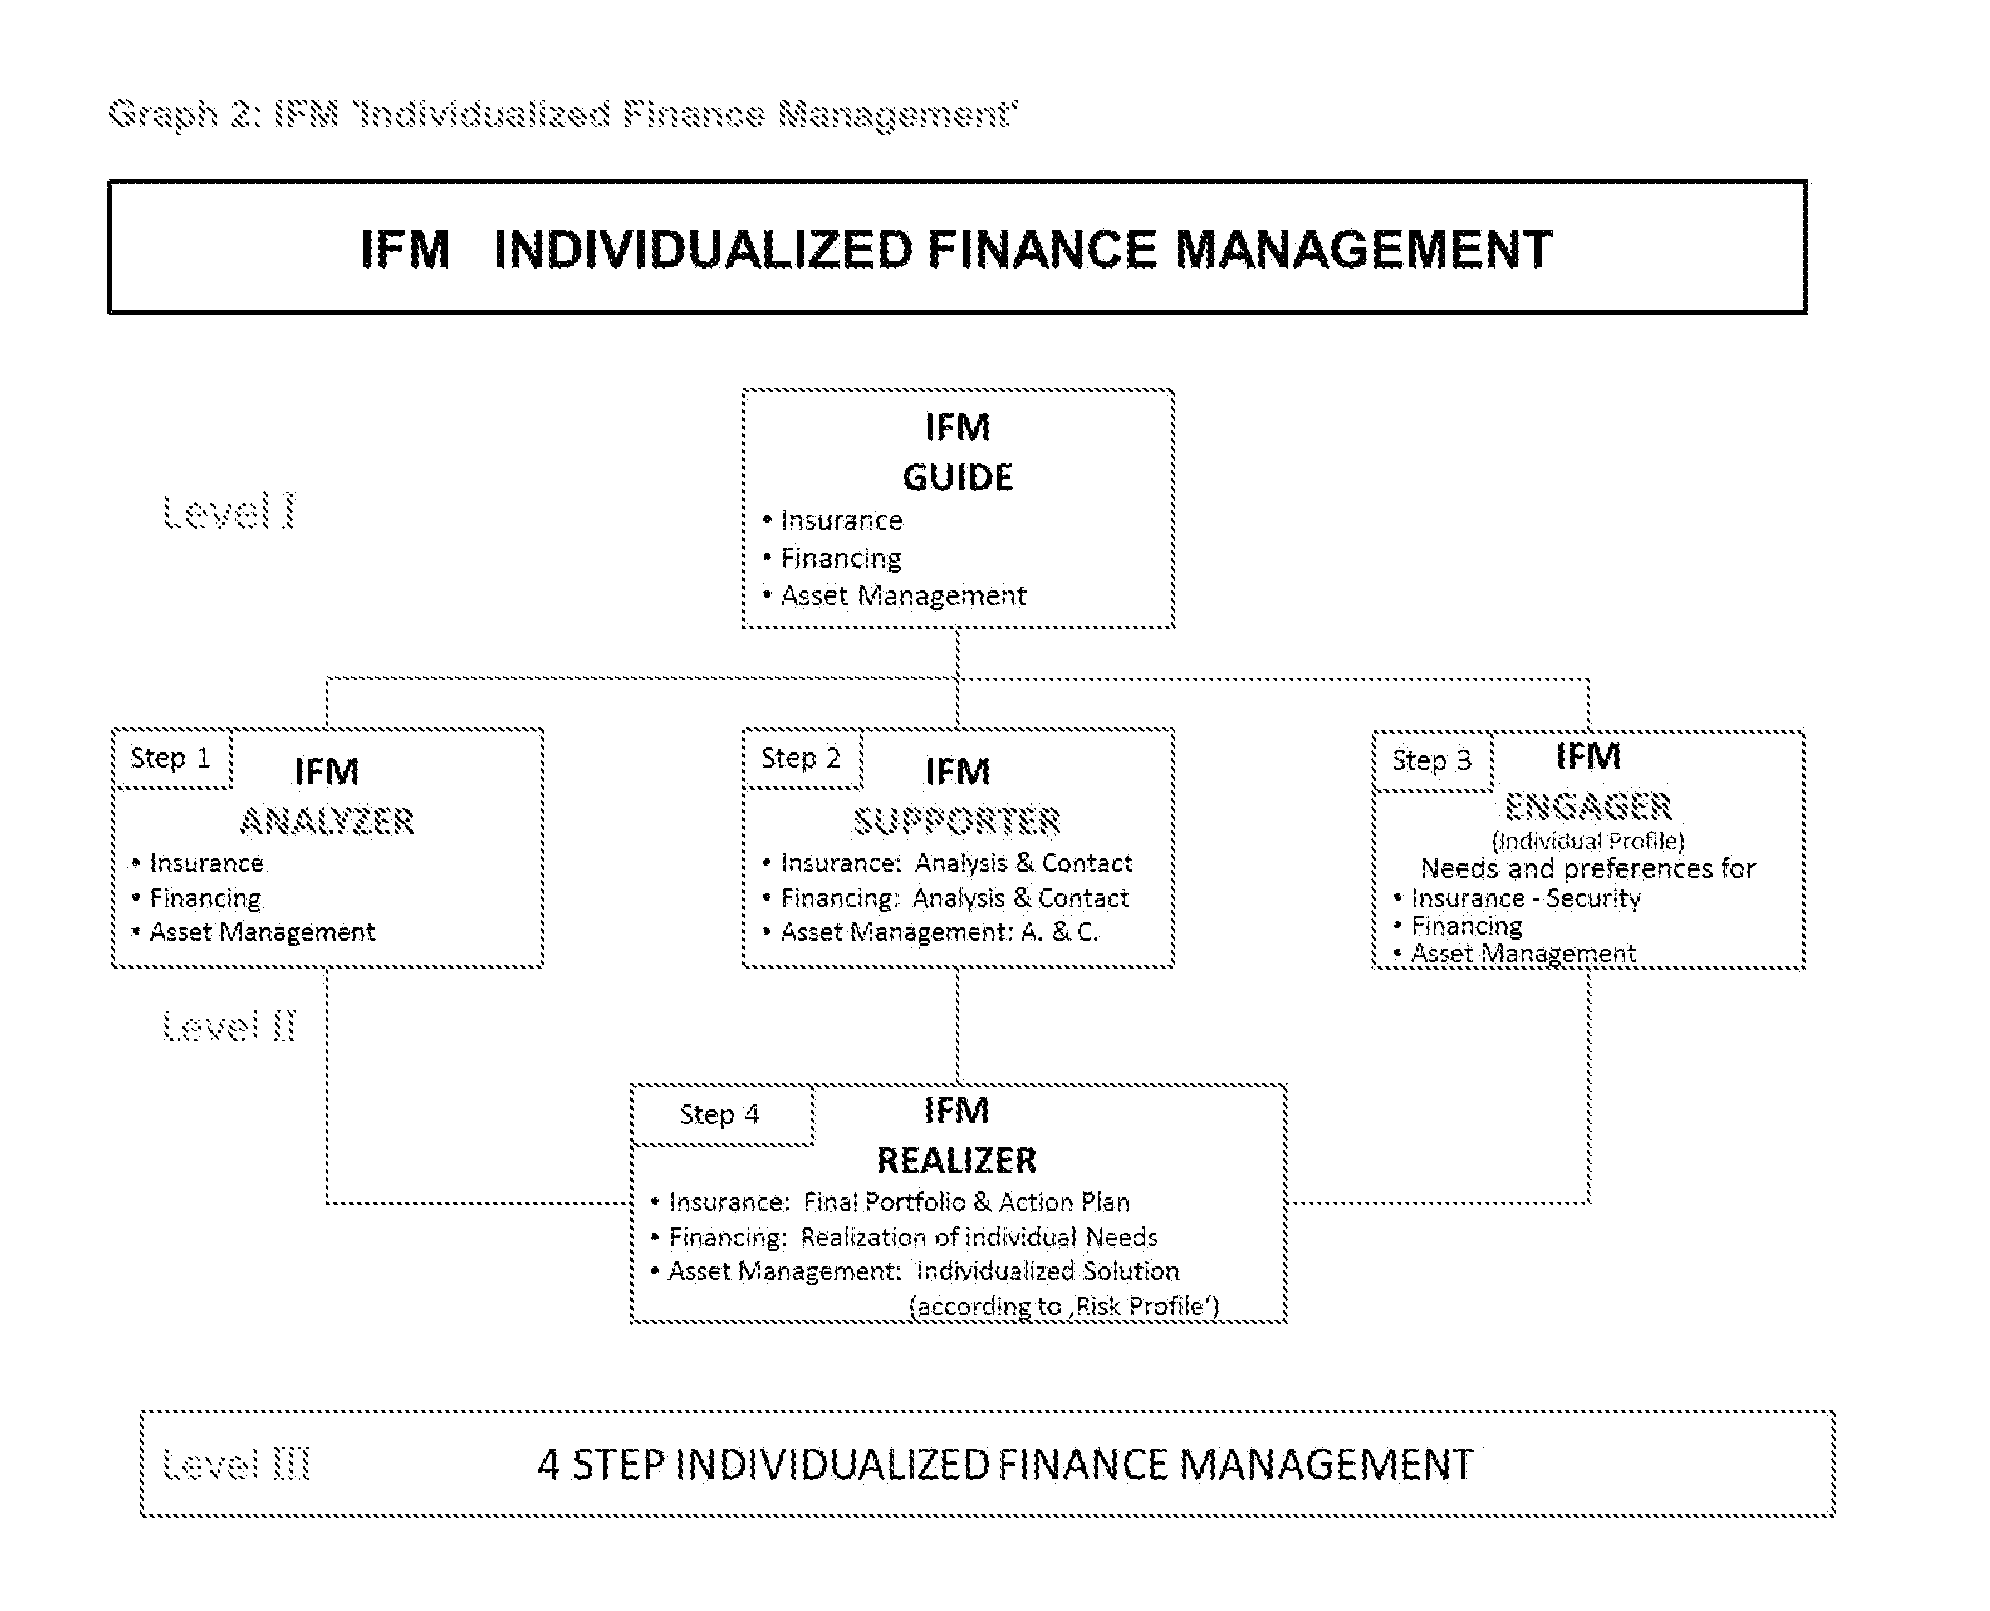 "indima apparatus" system, method and computer program product for individualized and collaborative health care